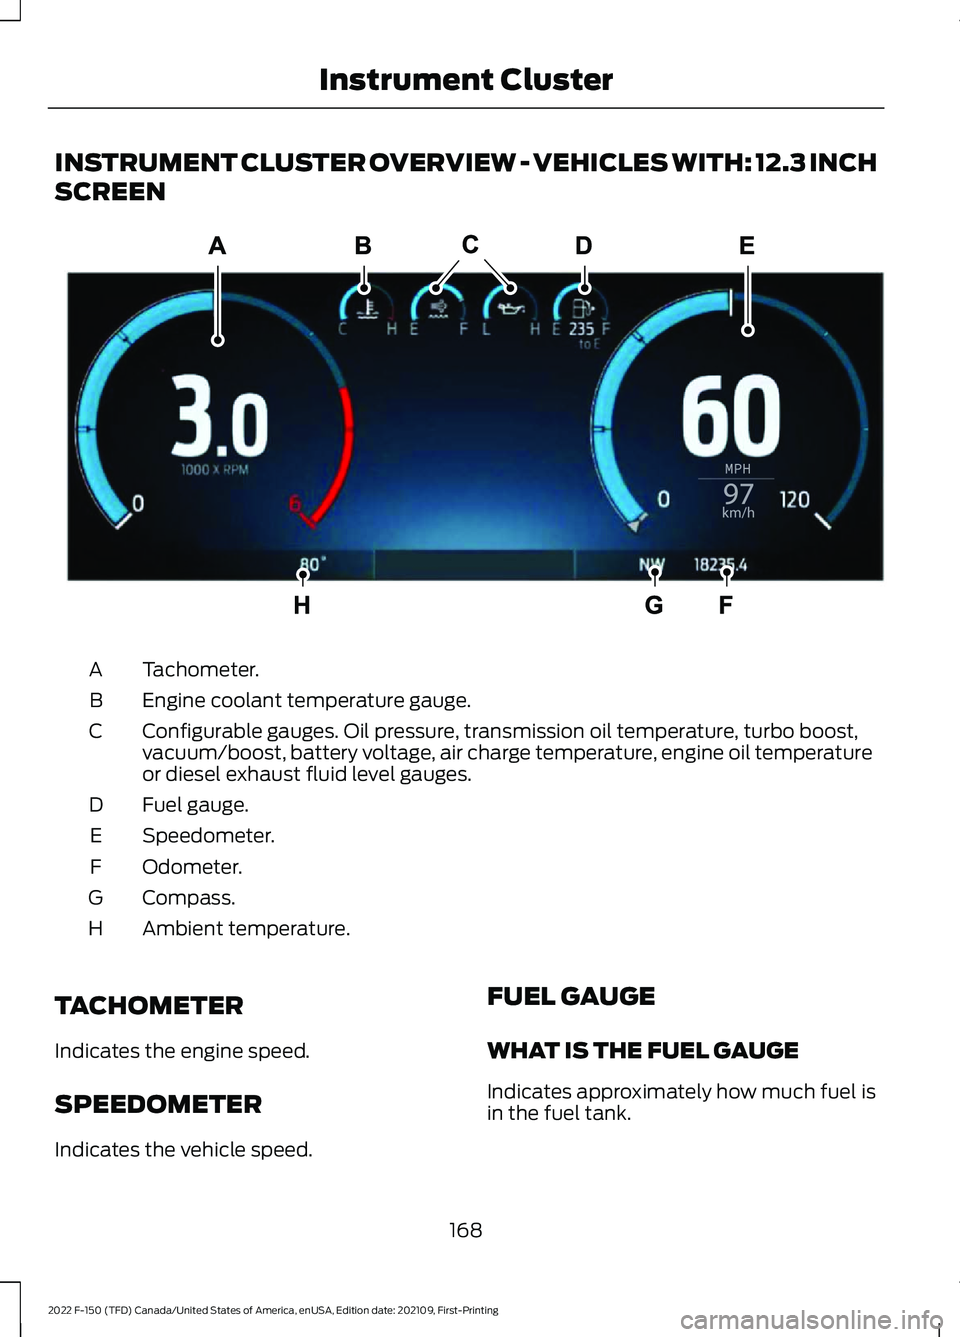 FORD F-150 2022 User Guide INSTRUMENT CLUSTER OVERVIEW - VEHICLES WITH: 12.3 INCH
SCREEN
Tachometer.
A
Engine coolant temperature gauge.
B
Configurable gauges. Oil pressure, transmission oil temperature, turbo boost,
vacuum/boo